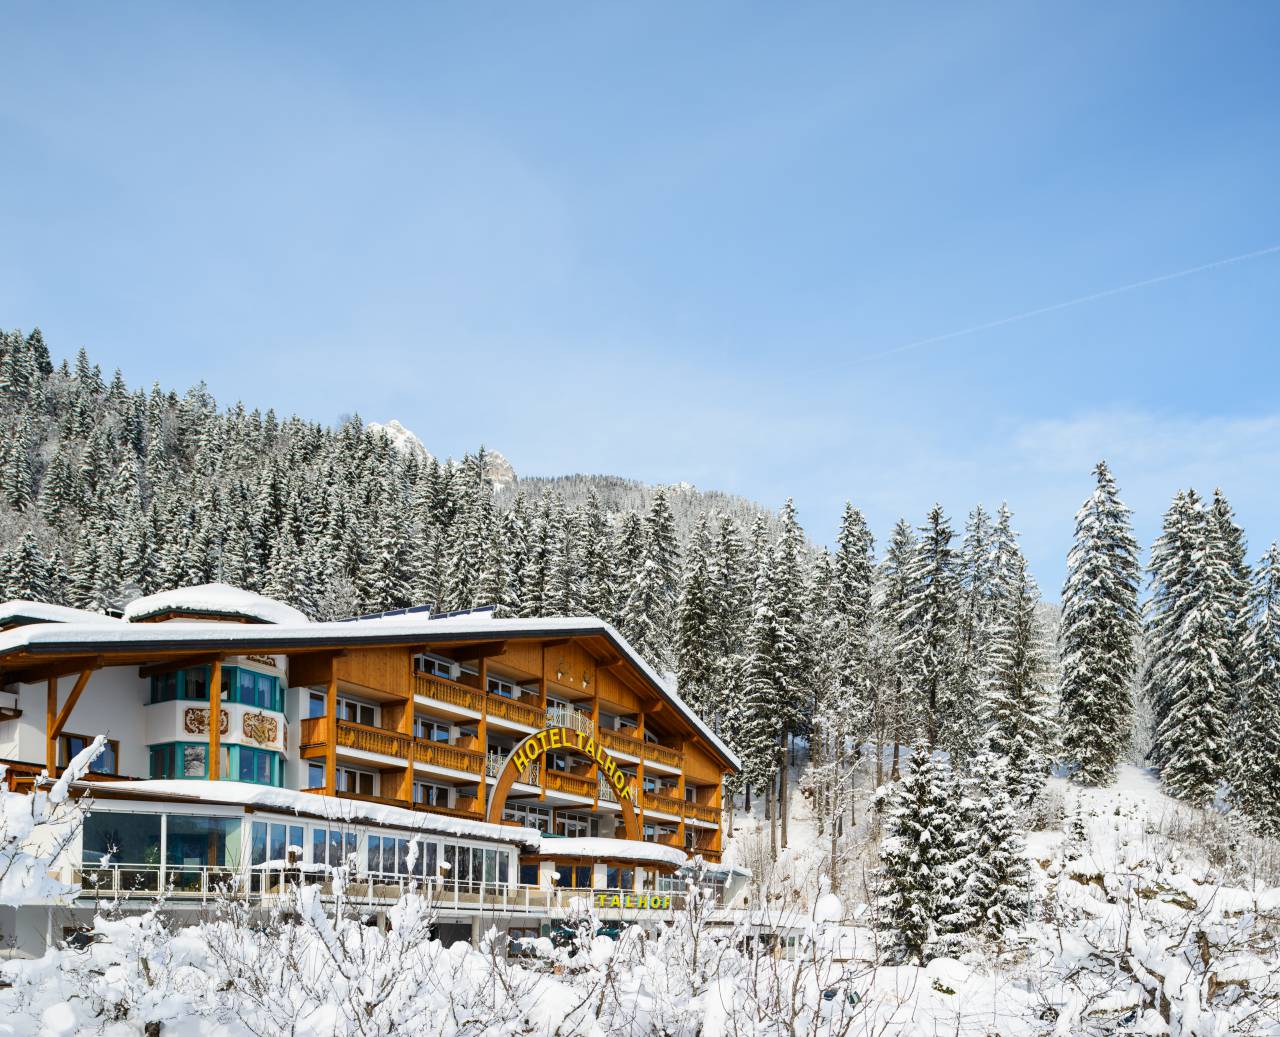 Panoramahotel Talhof in the middle of the snowy winter landscape in the mountains